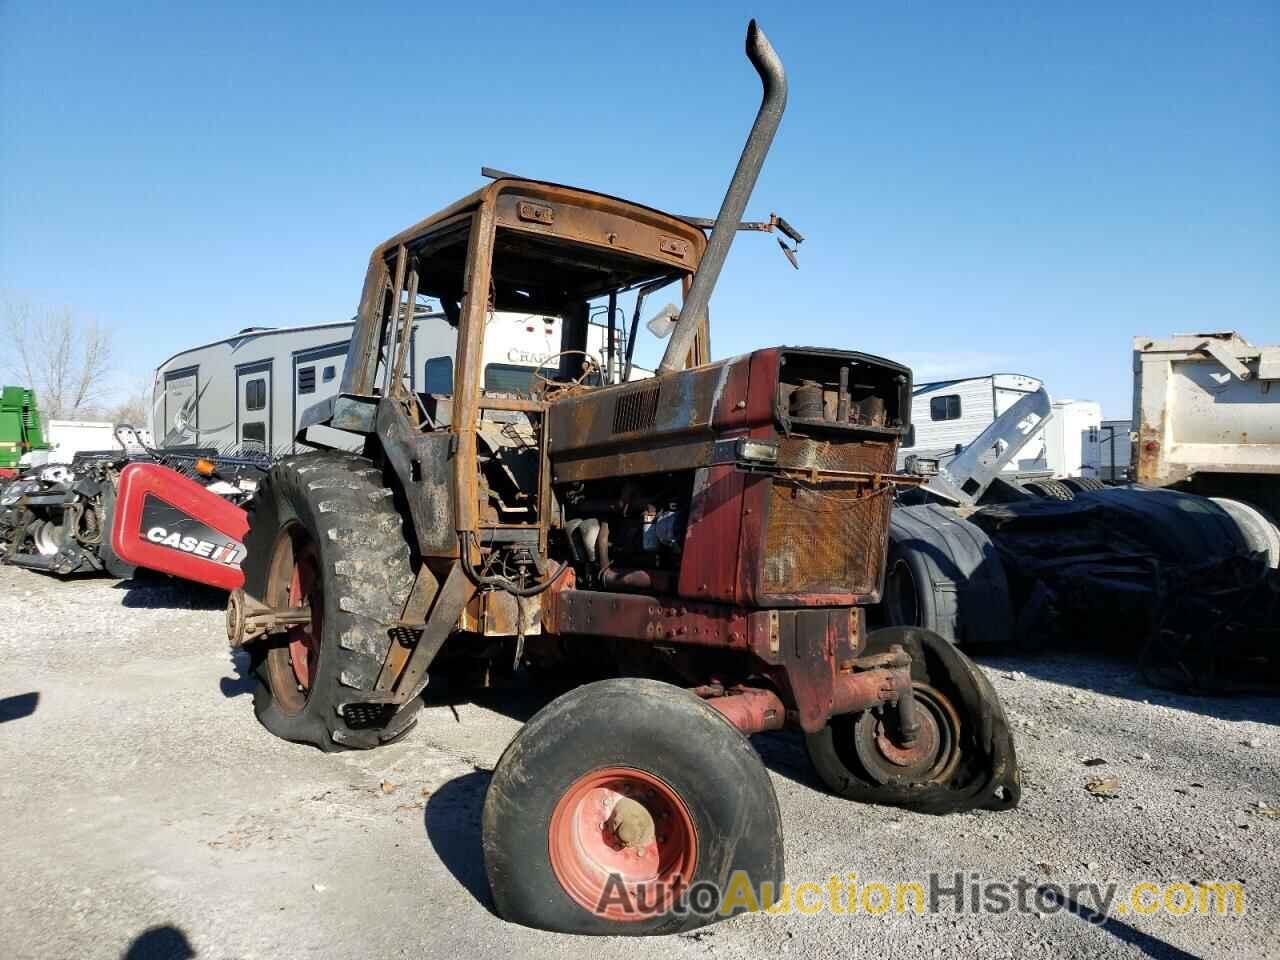 1980 CASE TRACTOR, BURNED